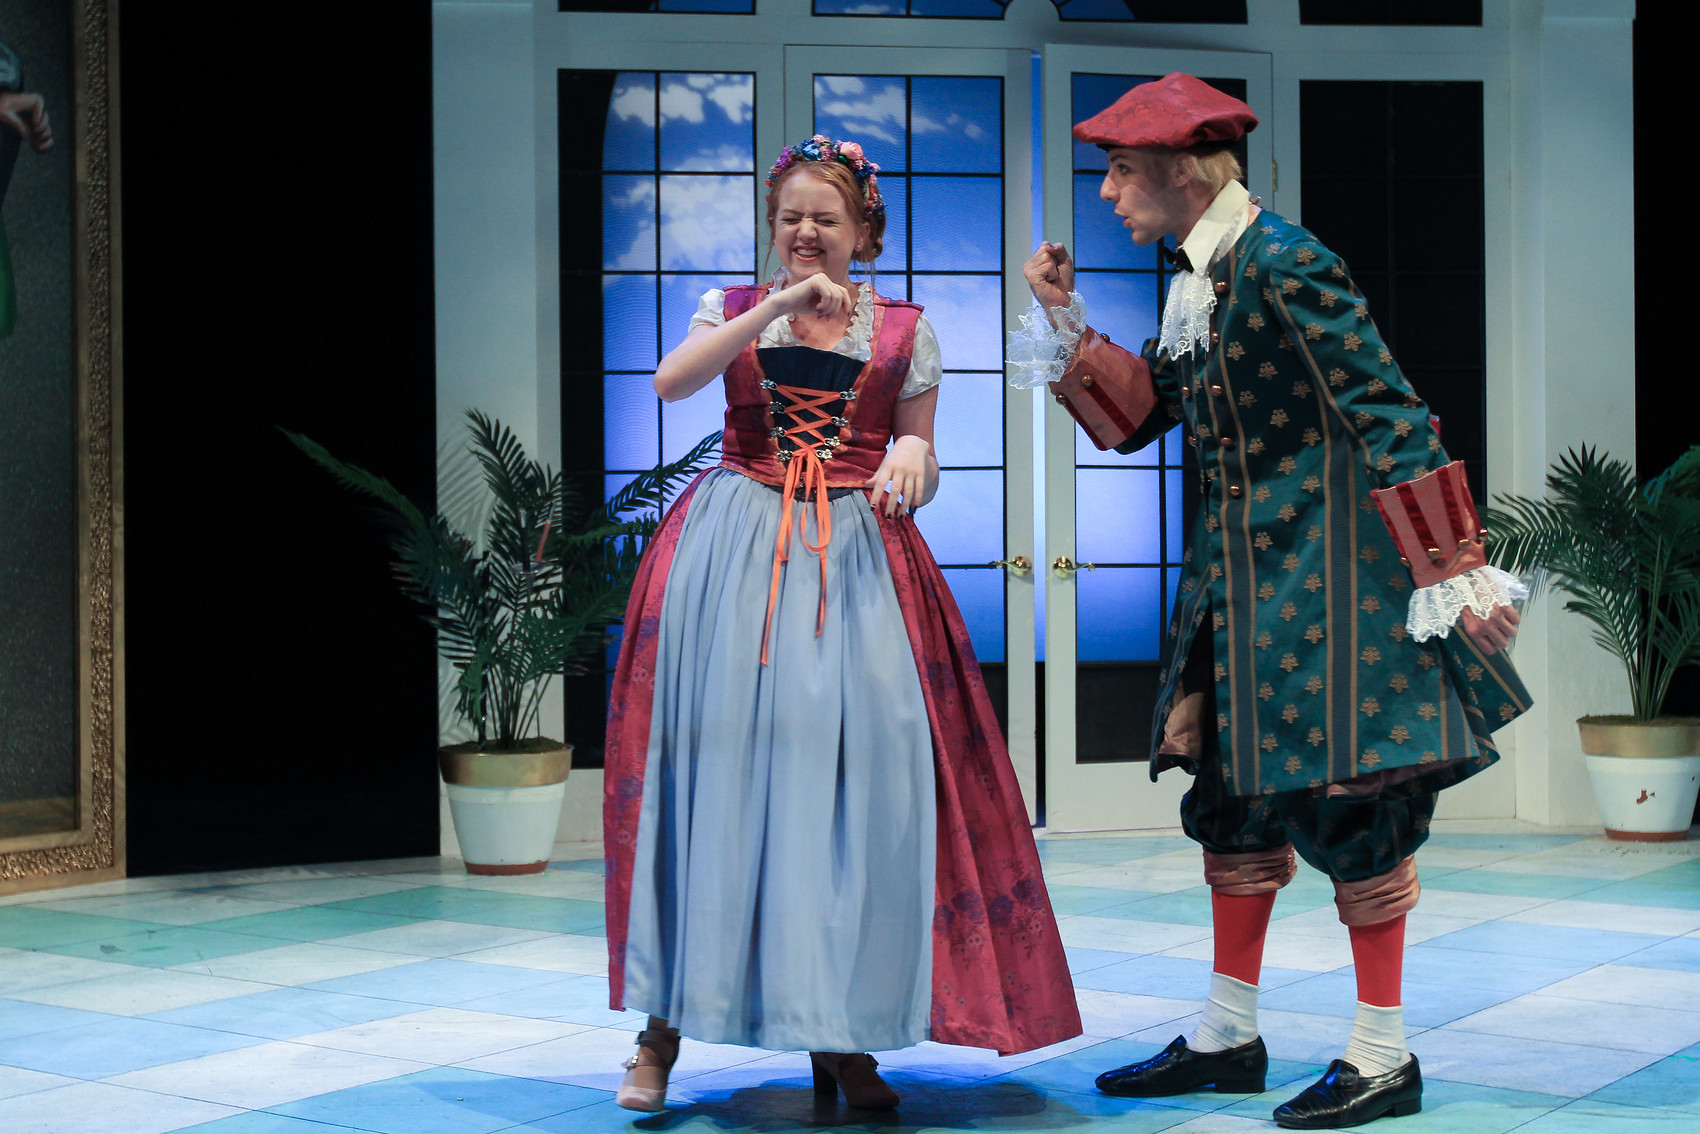 two student actors in period costumes stand on a stage of a checkered tiled floor and large windows, speaking at each other.